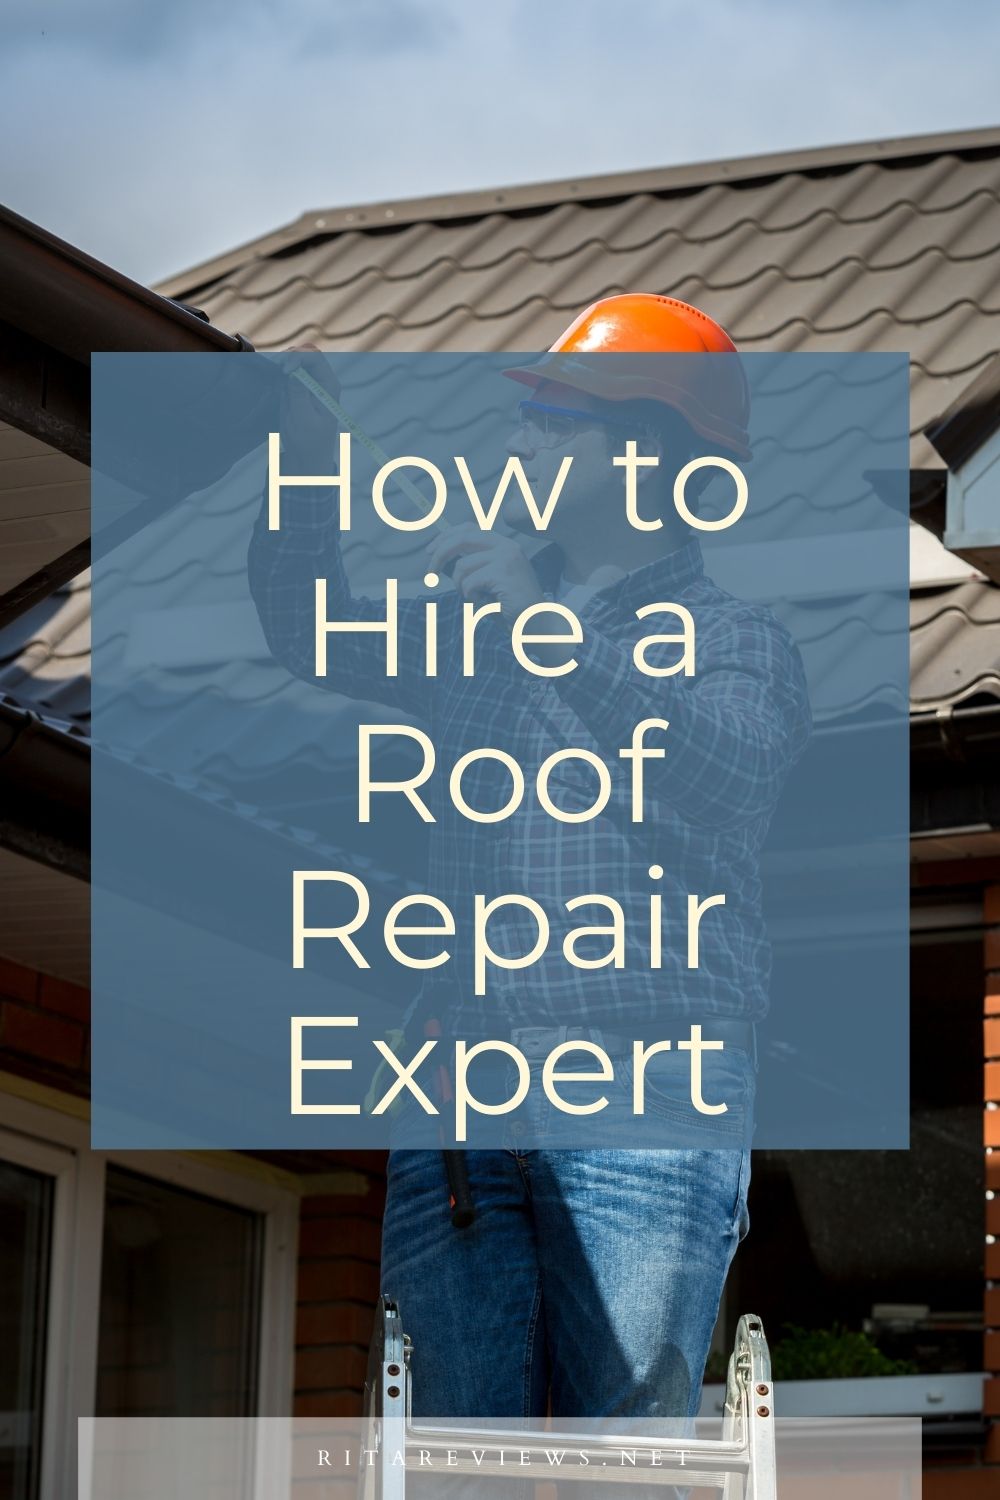 How to Hire a Roof Repair Expert